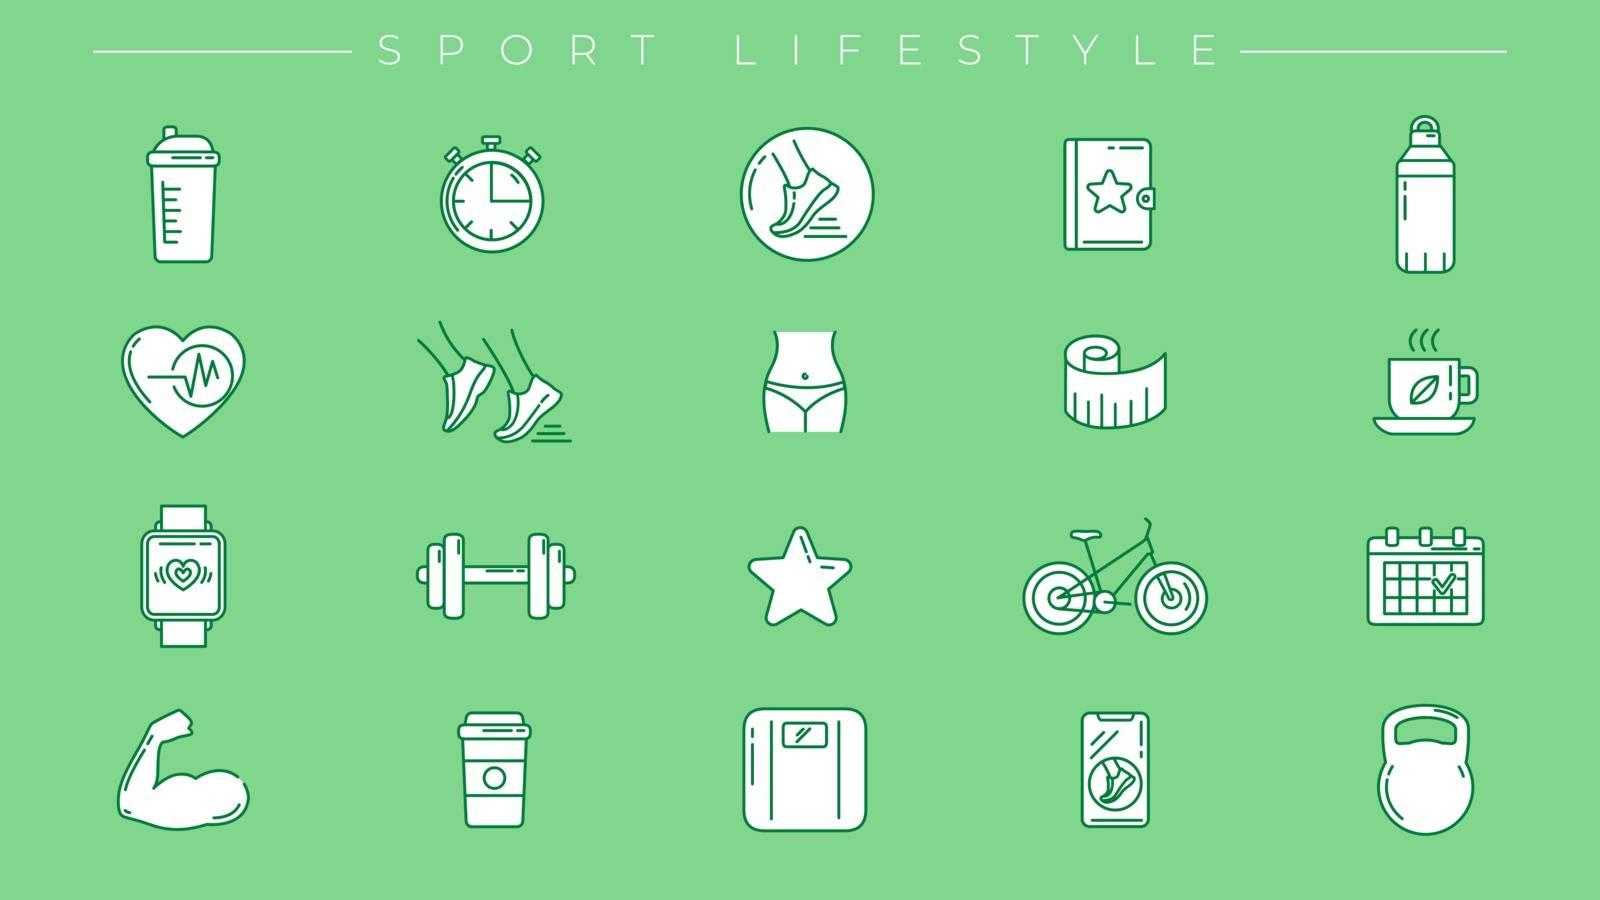 Set of Sport Lifestyle icons is one of the modern line icons sets on the theme of Healthy Lifestyle.